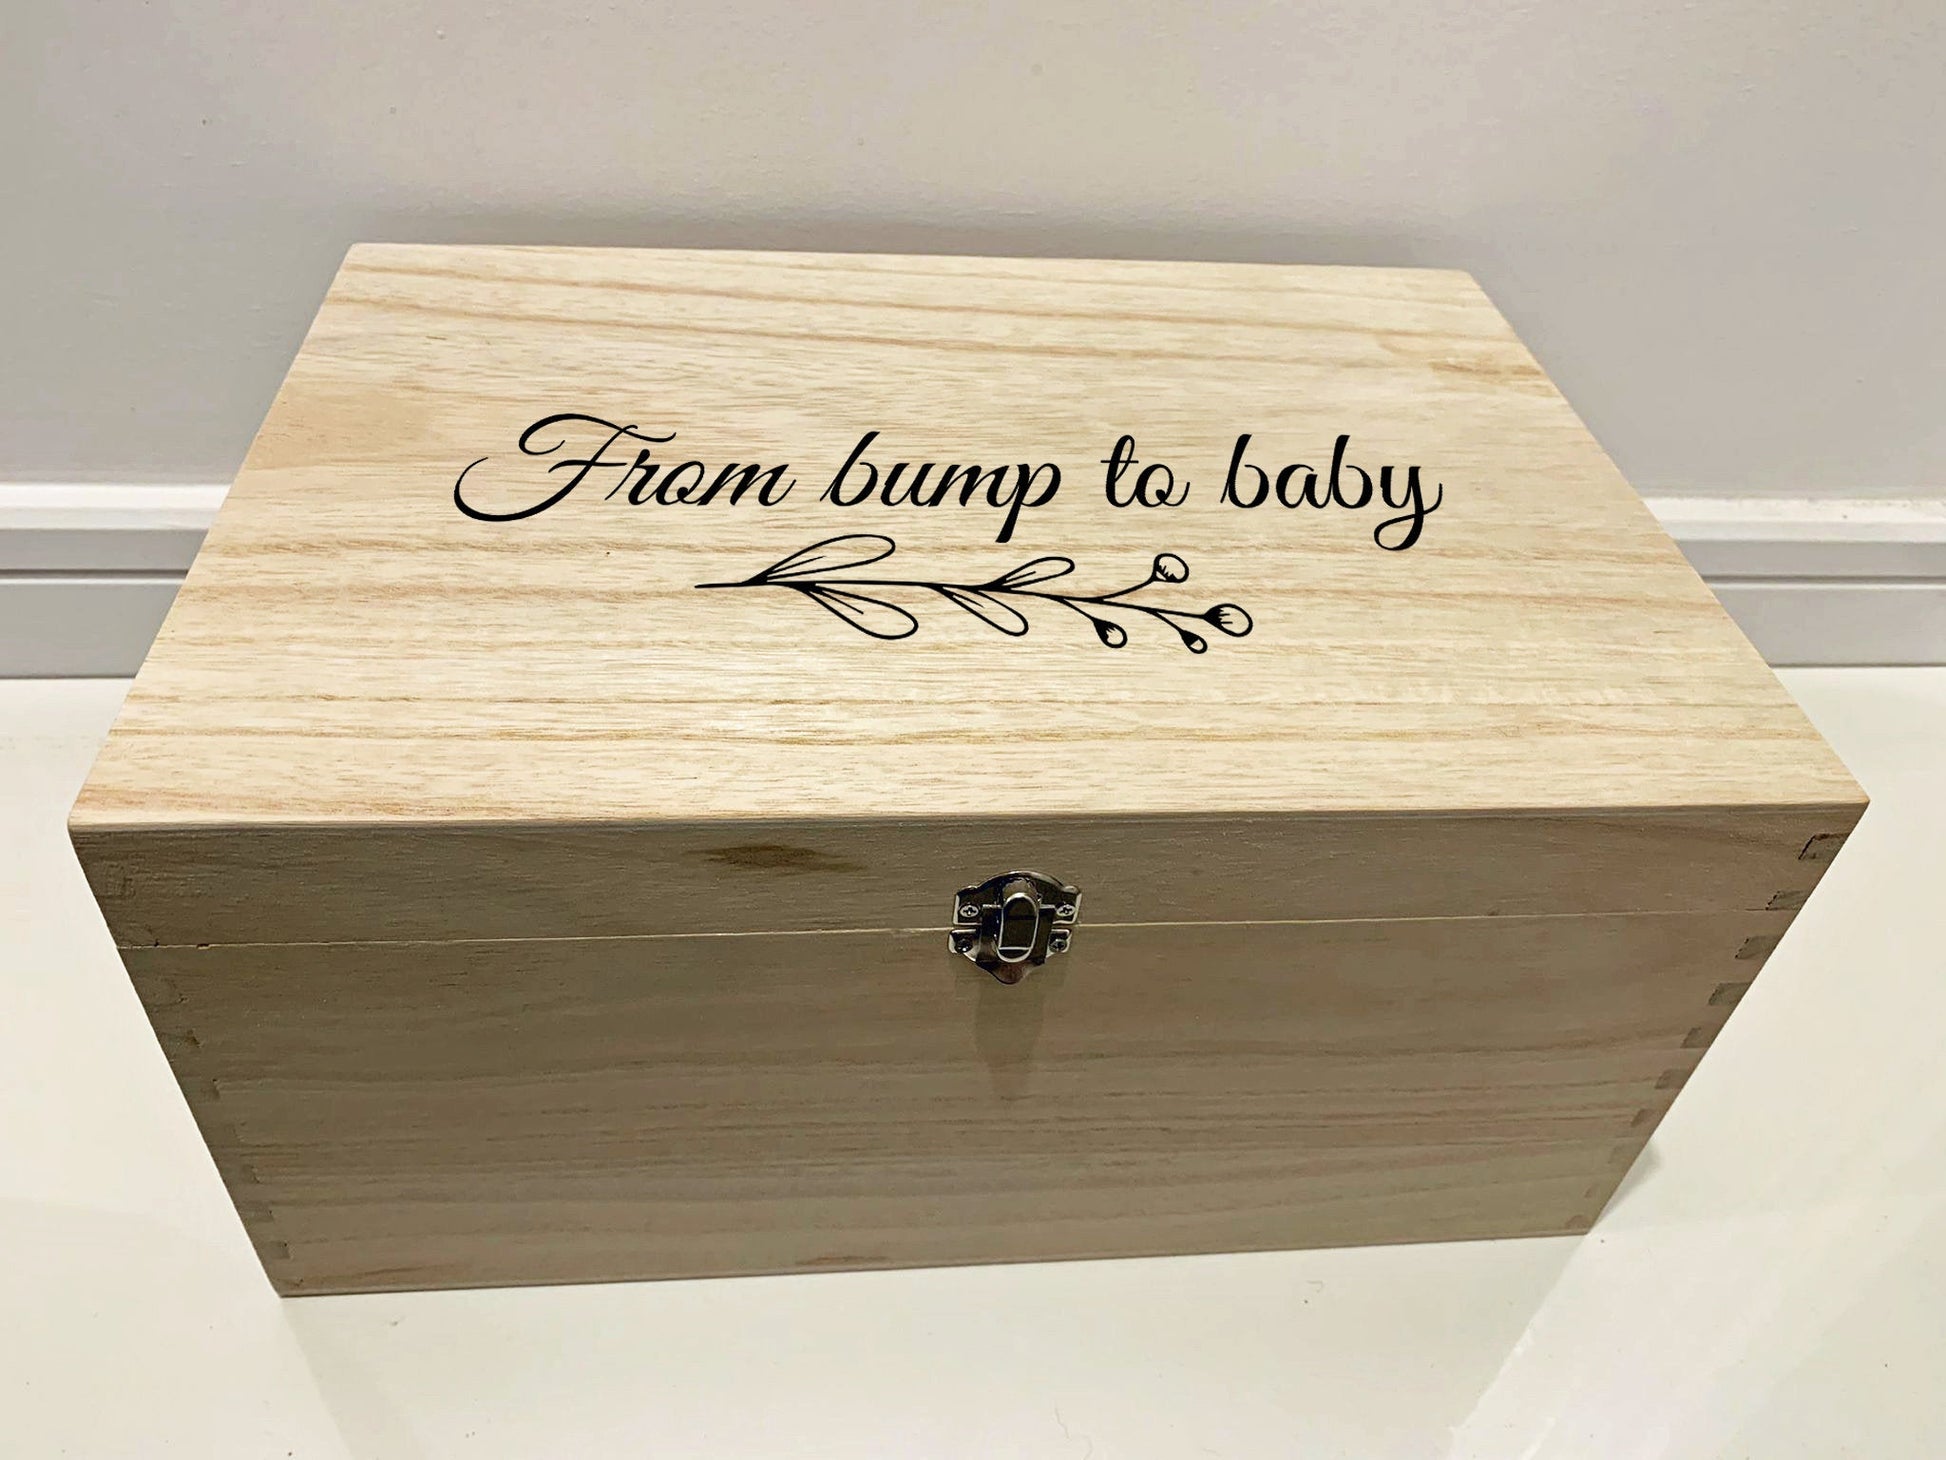 Large Personalised Engraved Wooden Keepsake Box, From Bump to Baby, Pregnancy Box - Resplendent Aurora